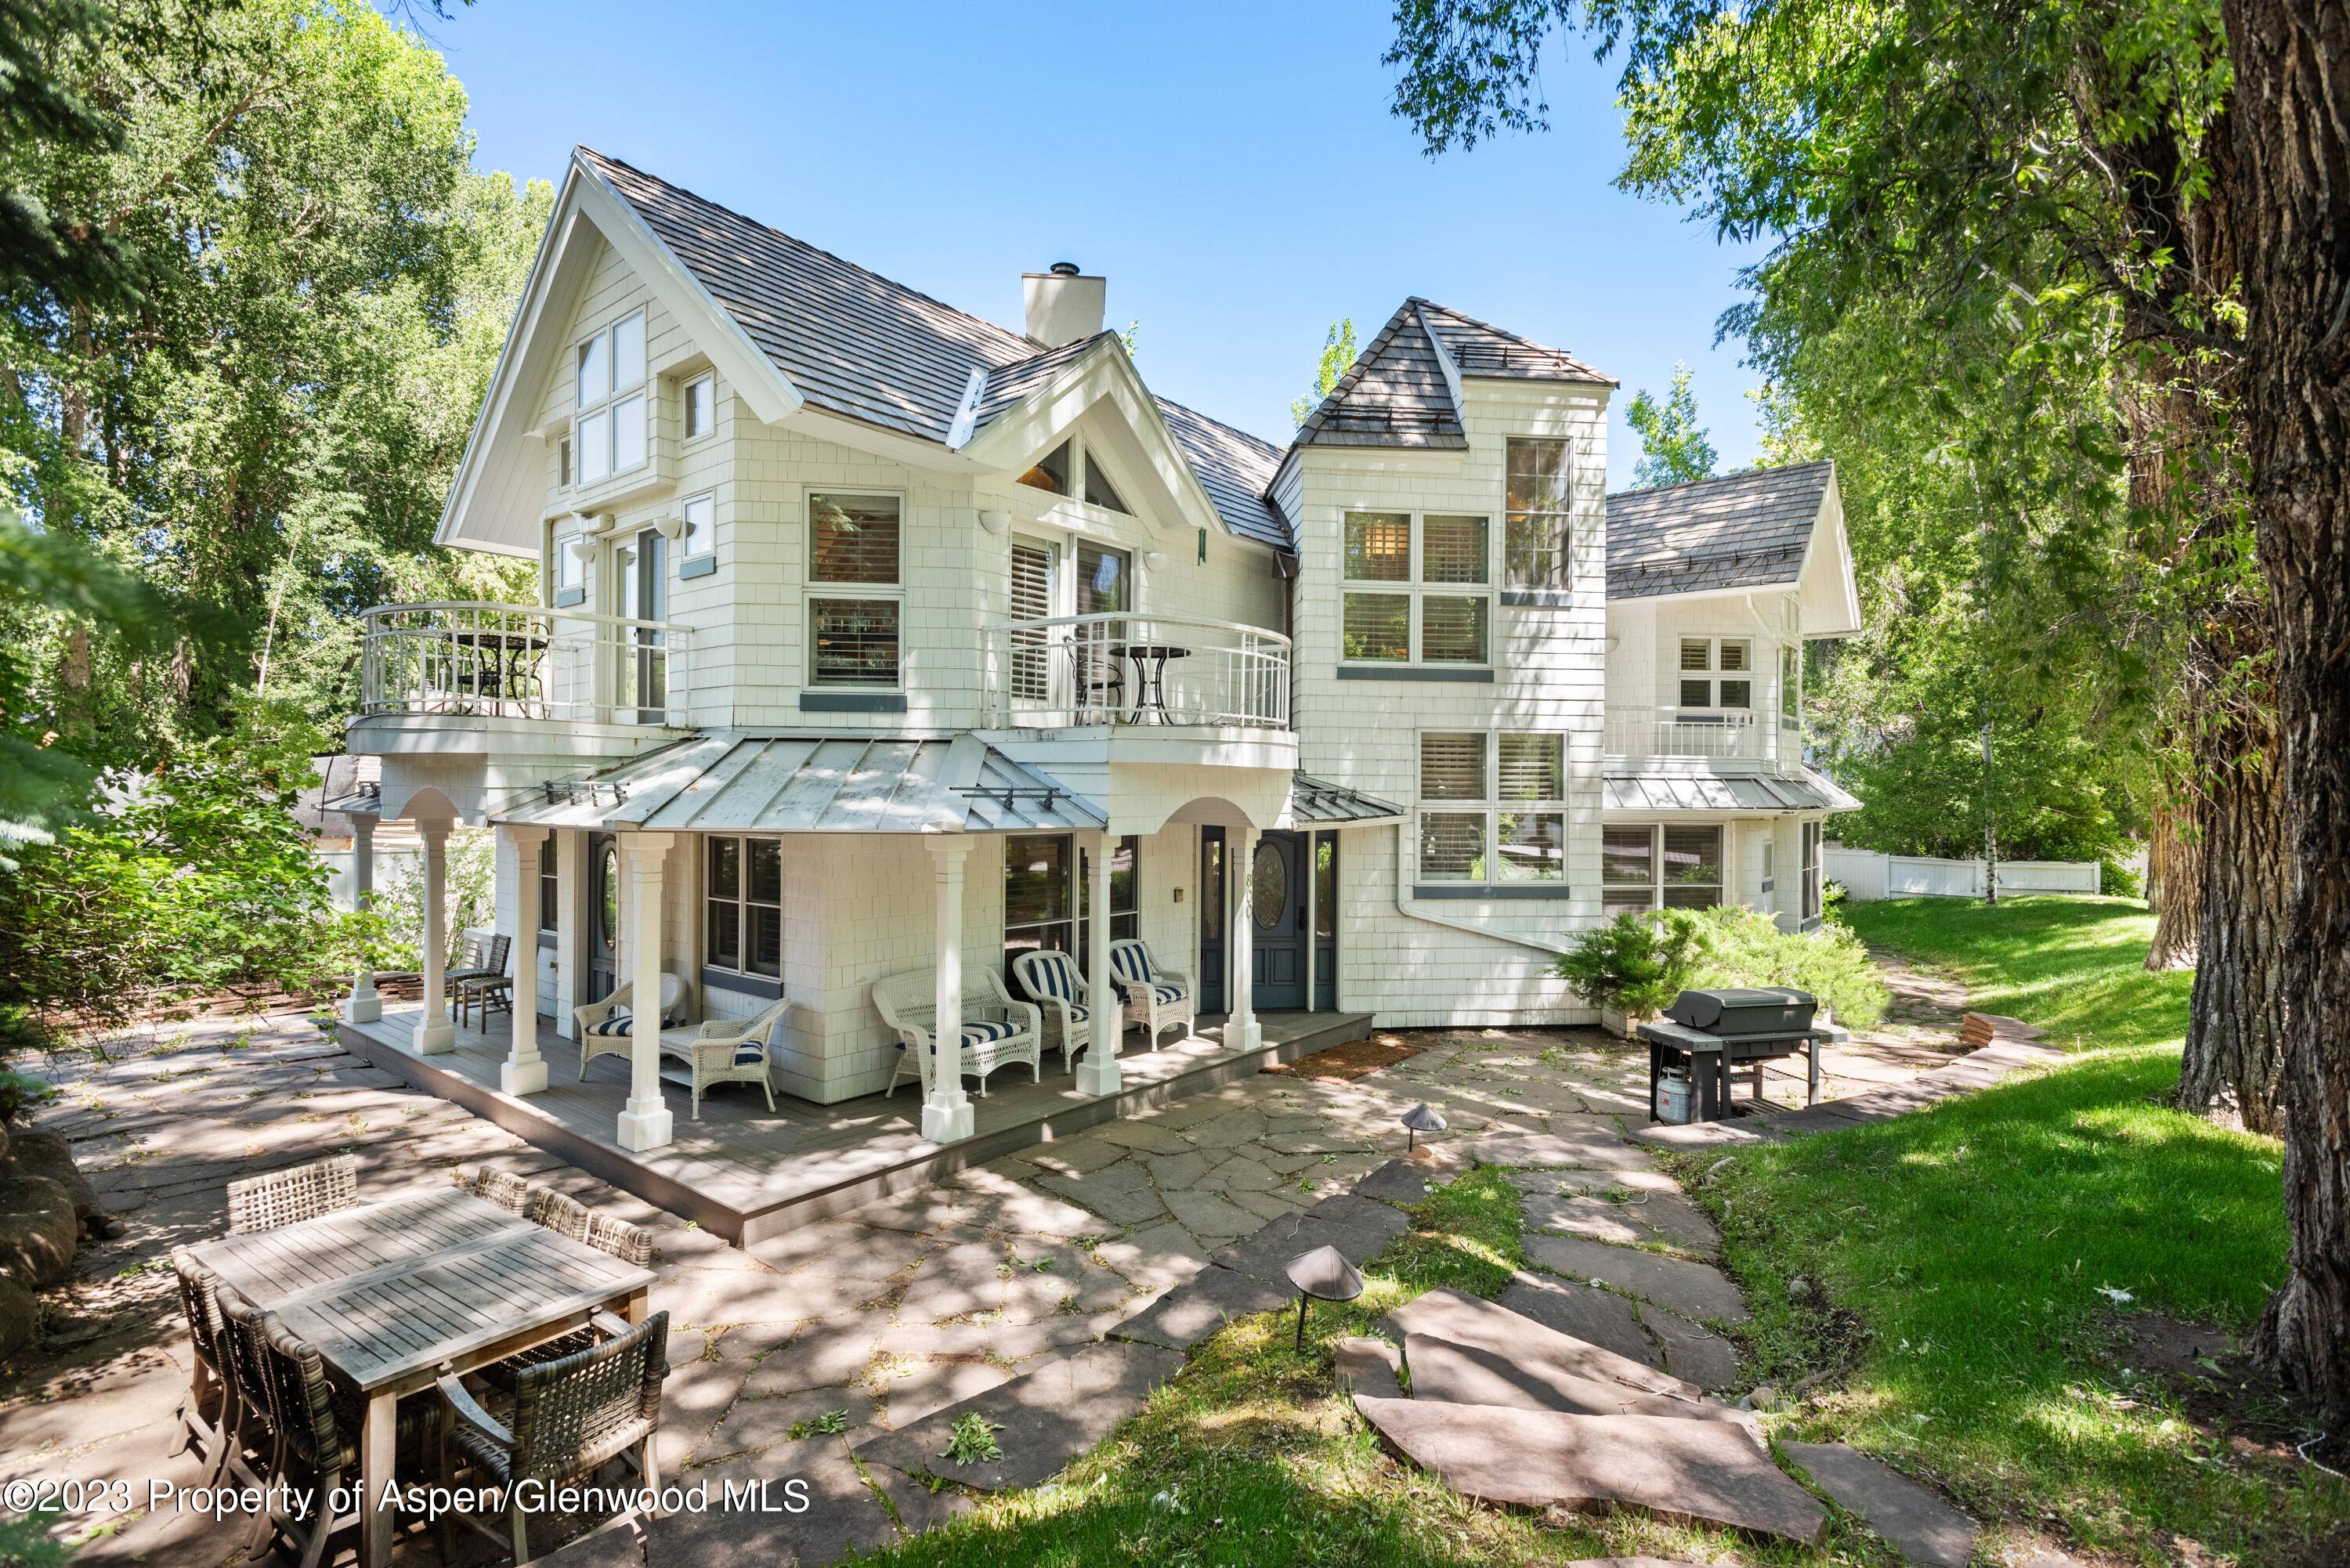 A timeless masterpiece designed by Aspen's renowned architect Charles Cunniffe.